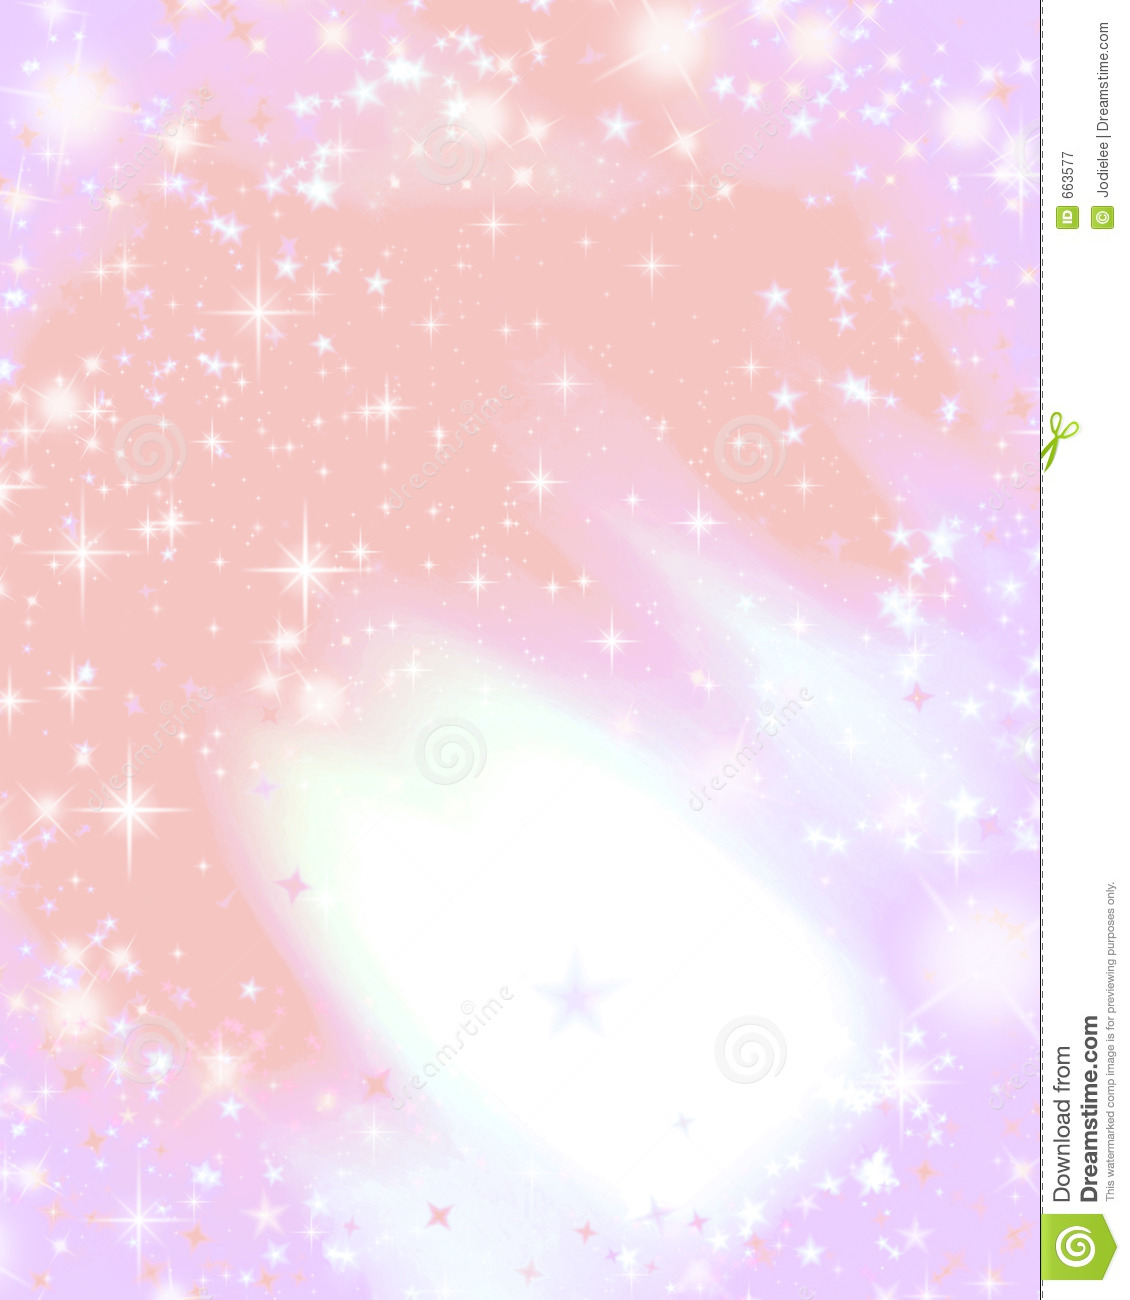 Pink Sparkle Star Background Royalty Free Stock Photography   Image    